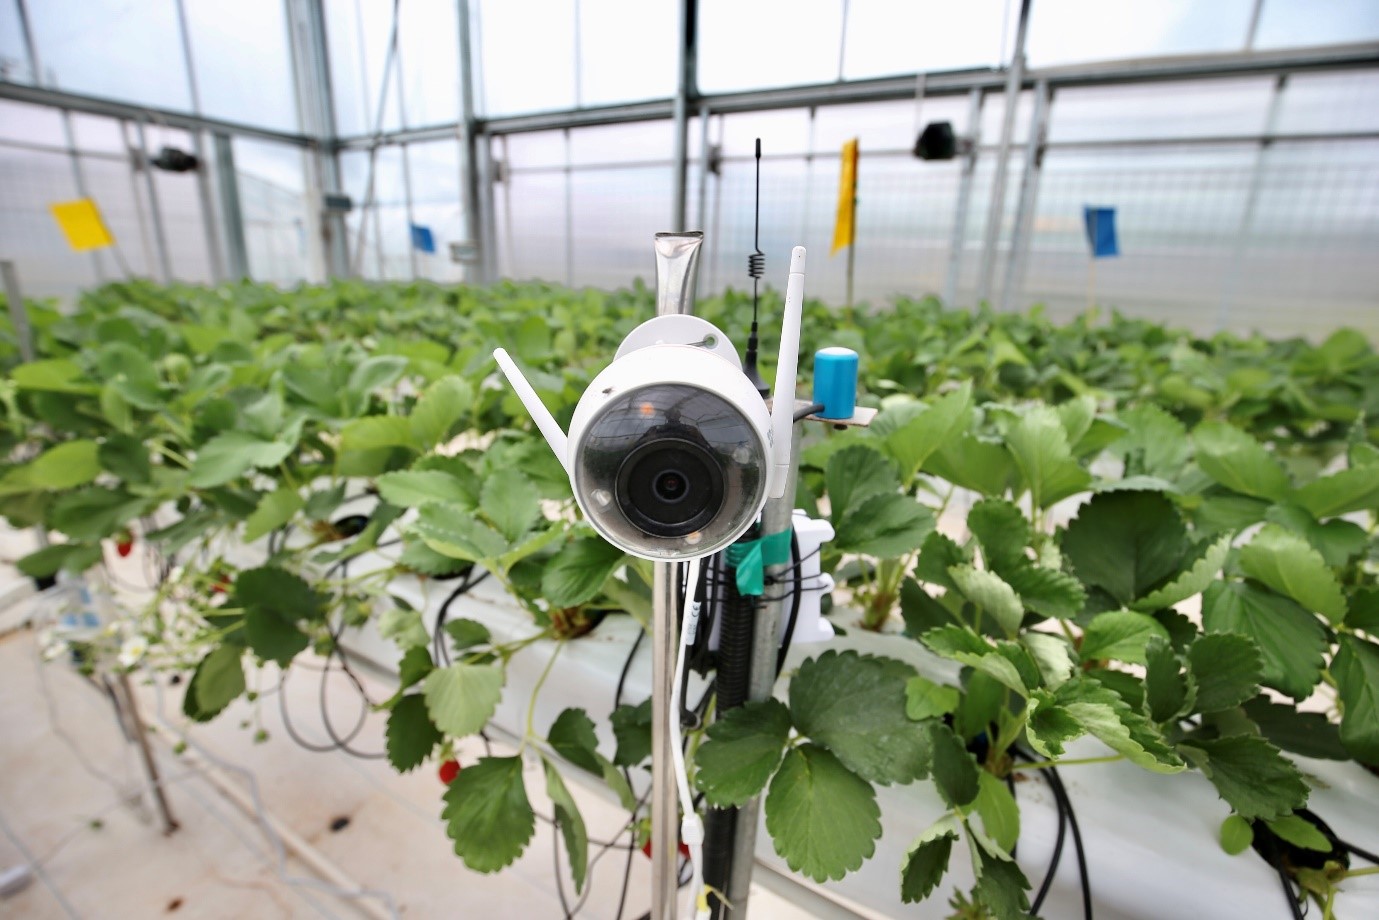 Sensors deployed in the greenhouse to monitor plant growth at the Smart Agriculture Competition (Source: Pinduoduo)